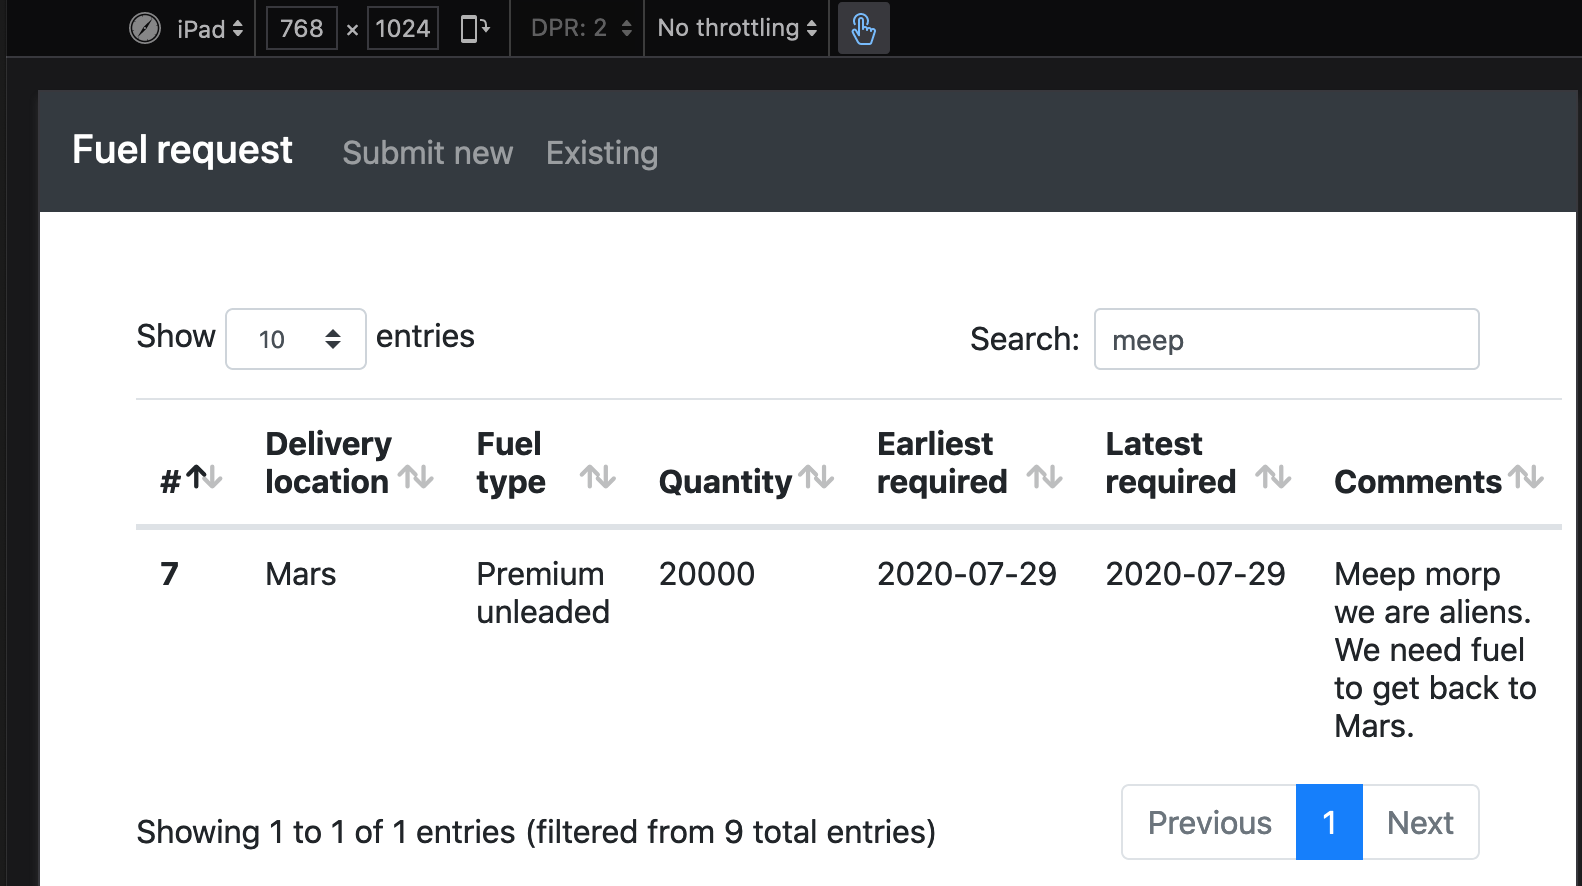 Image of the datatable showing existing fuel demands